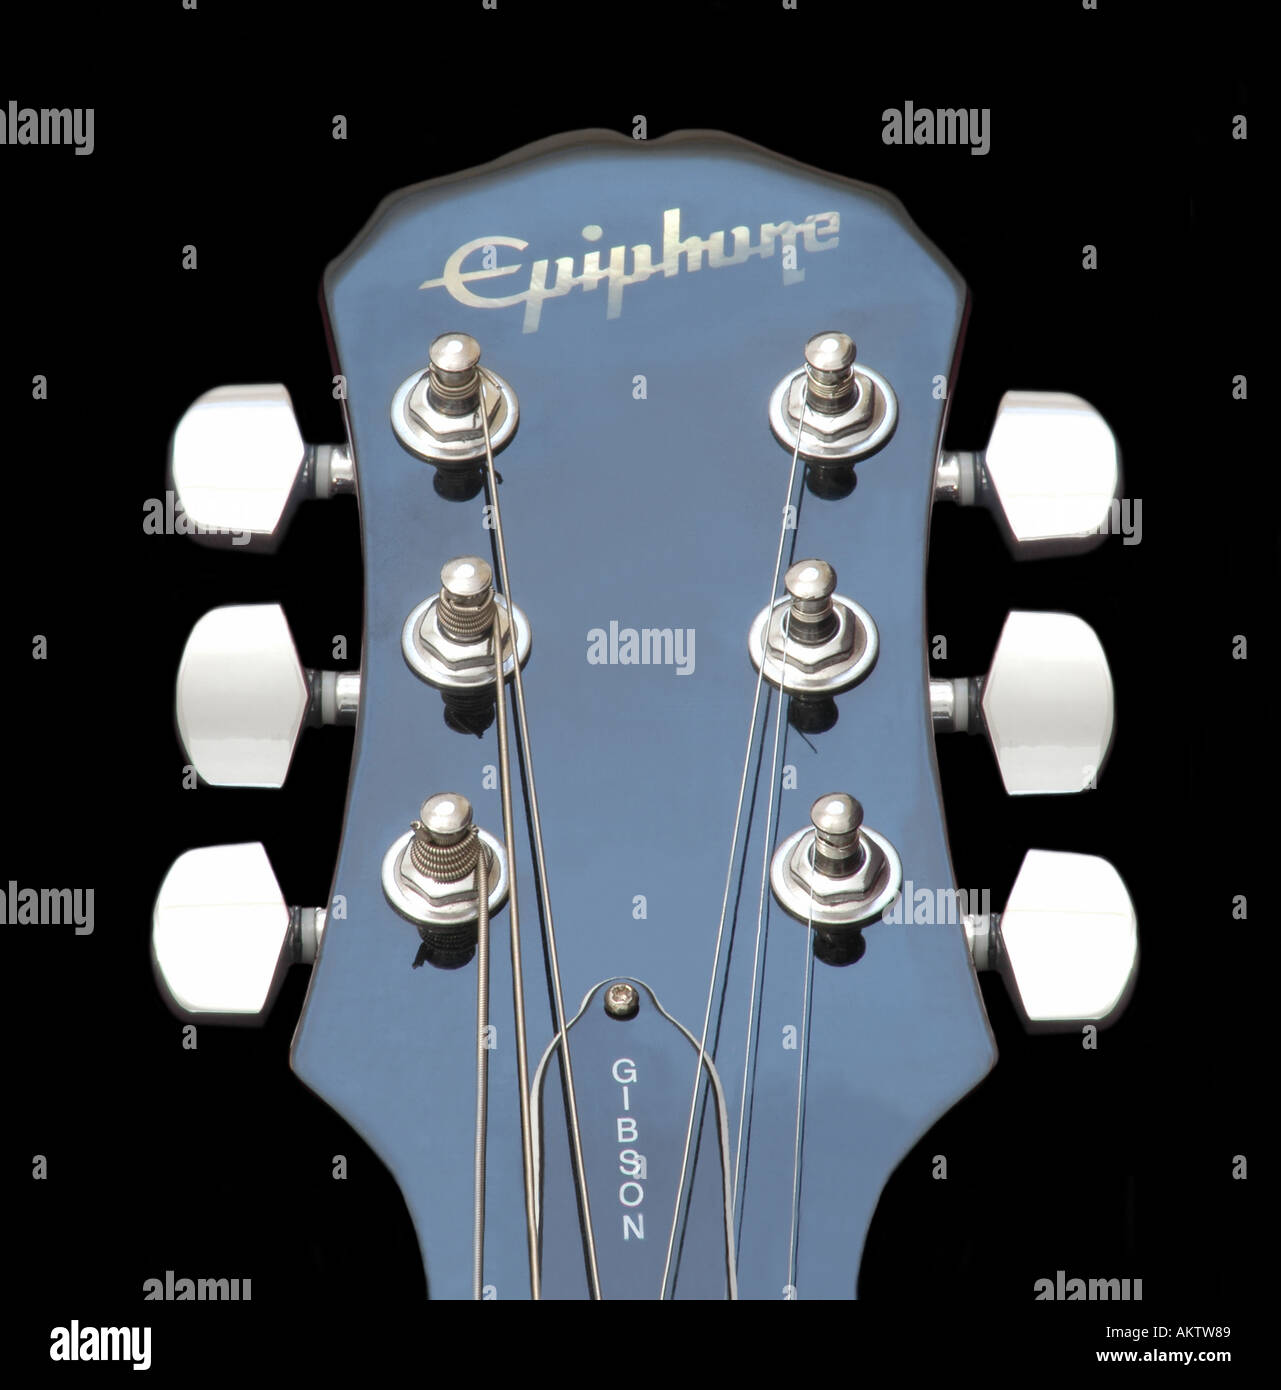 Gibson epiphone les paul electric guitar music sound close up of headstock  view Photo Stock - Alamy